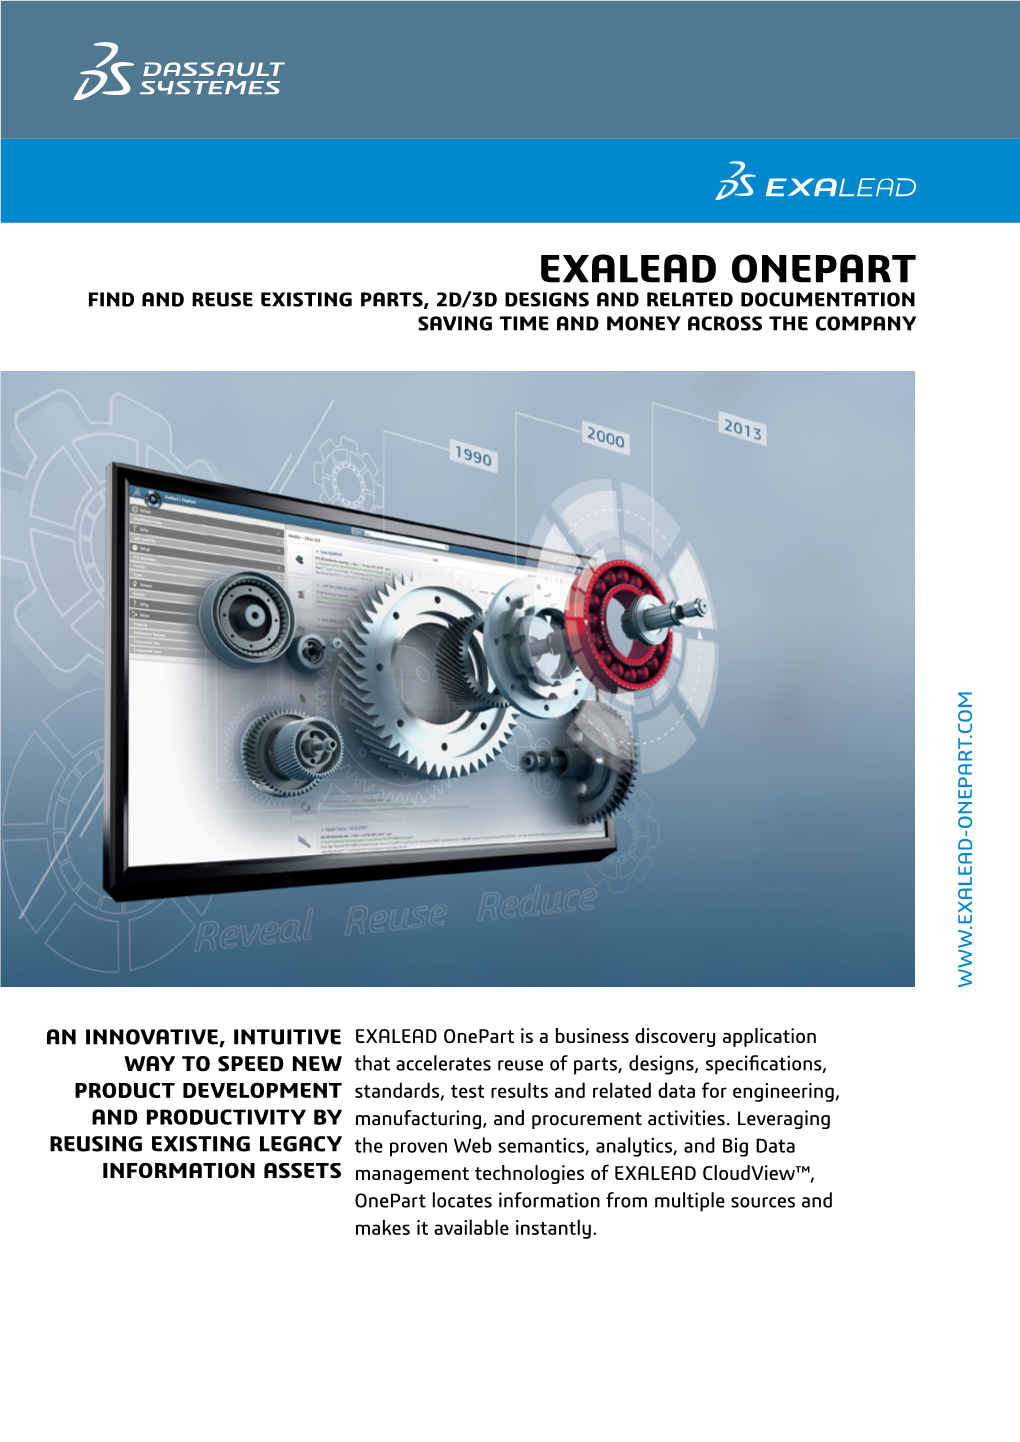 EXALEAD Onepart Find and Reuse Existing Parts, 2D/3D Designs and Related Documentation Saving Time and Money Across the Company